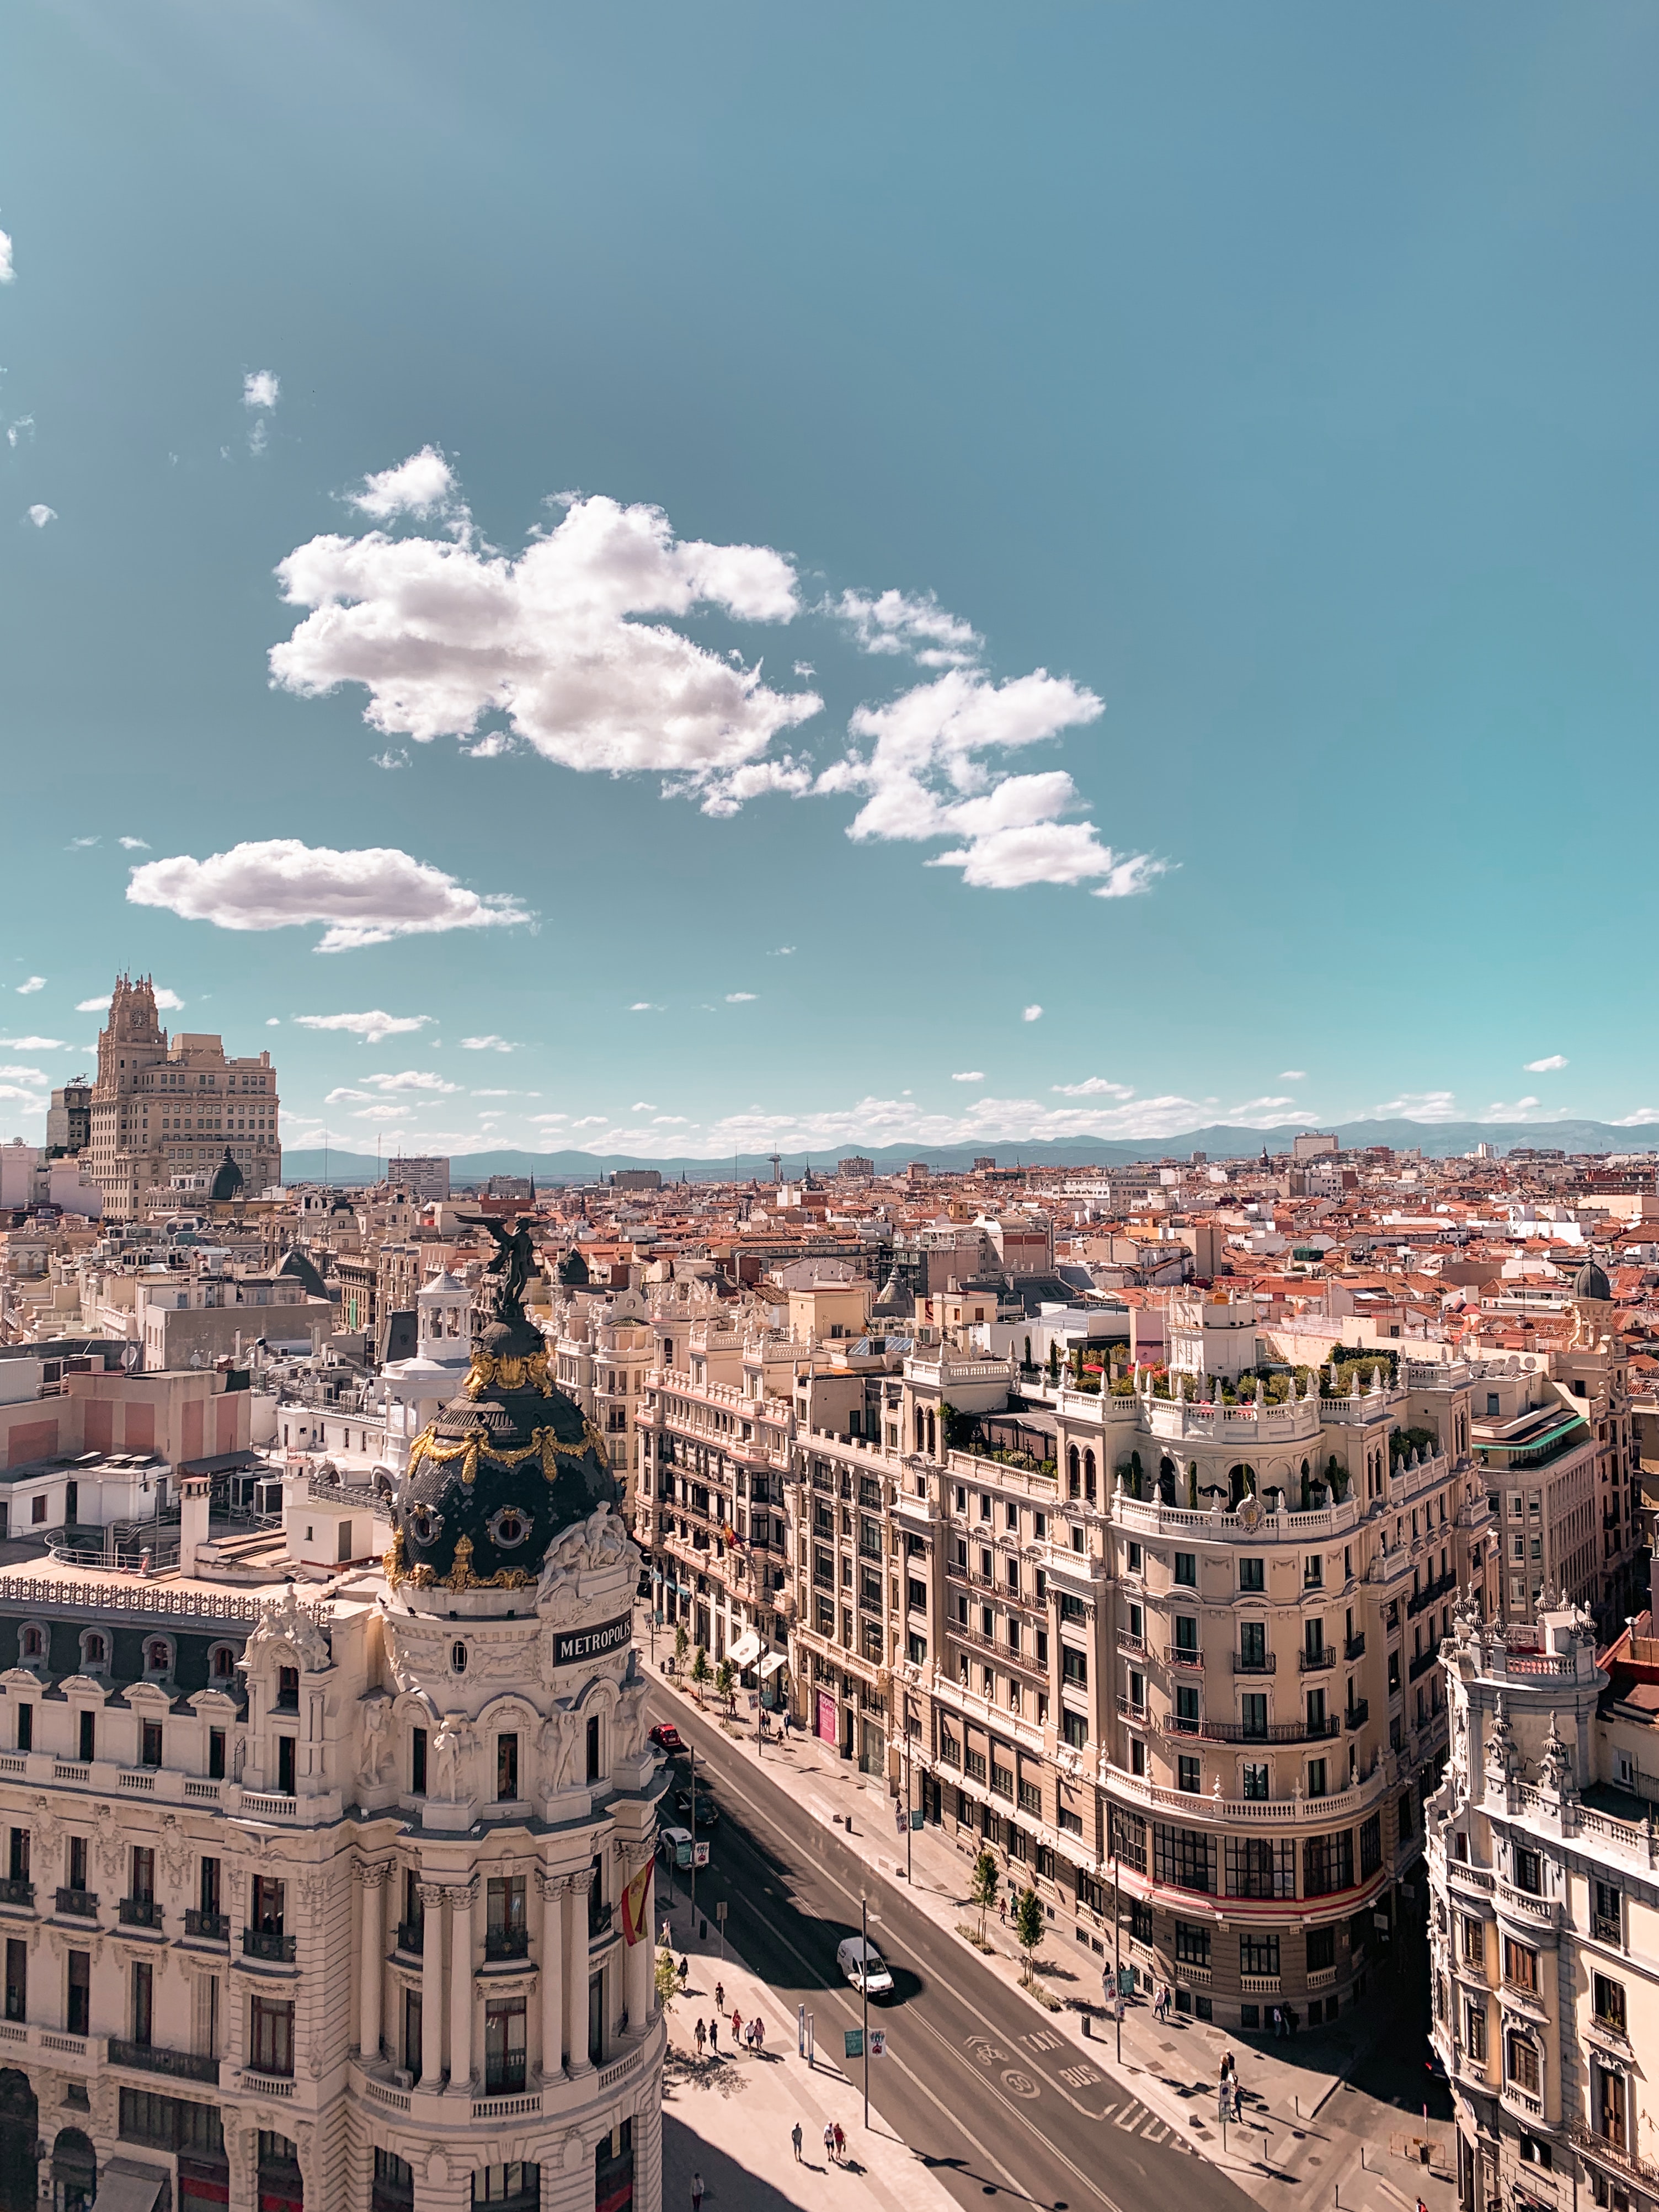 A view of Madrid in Spain.